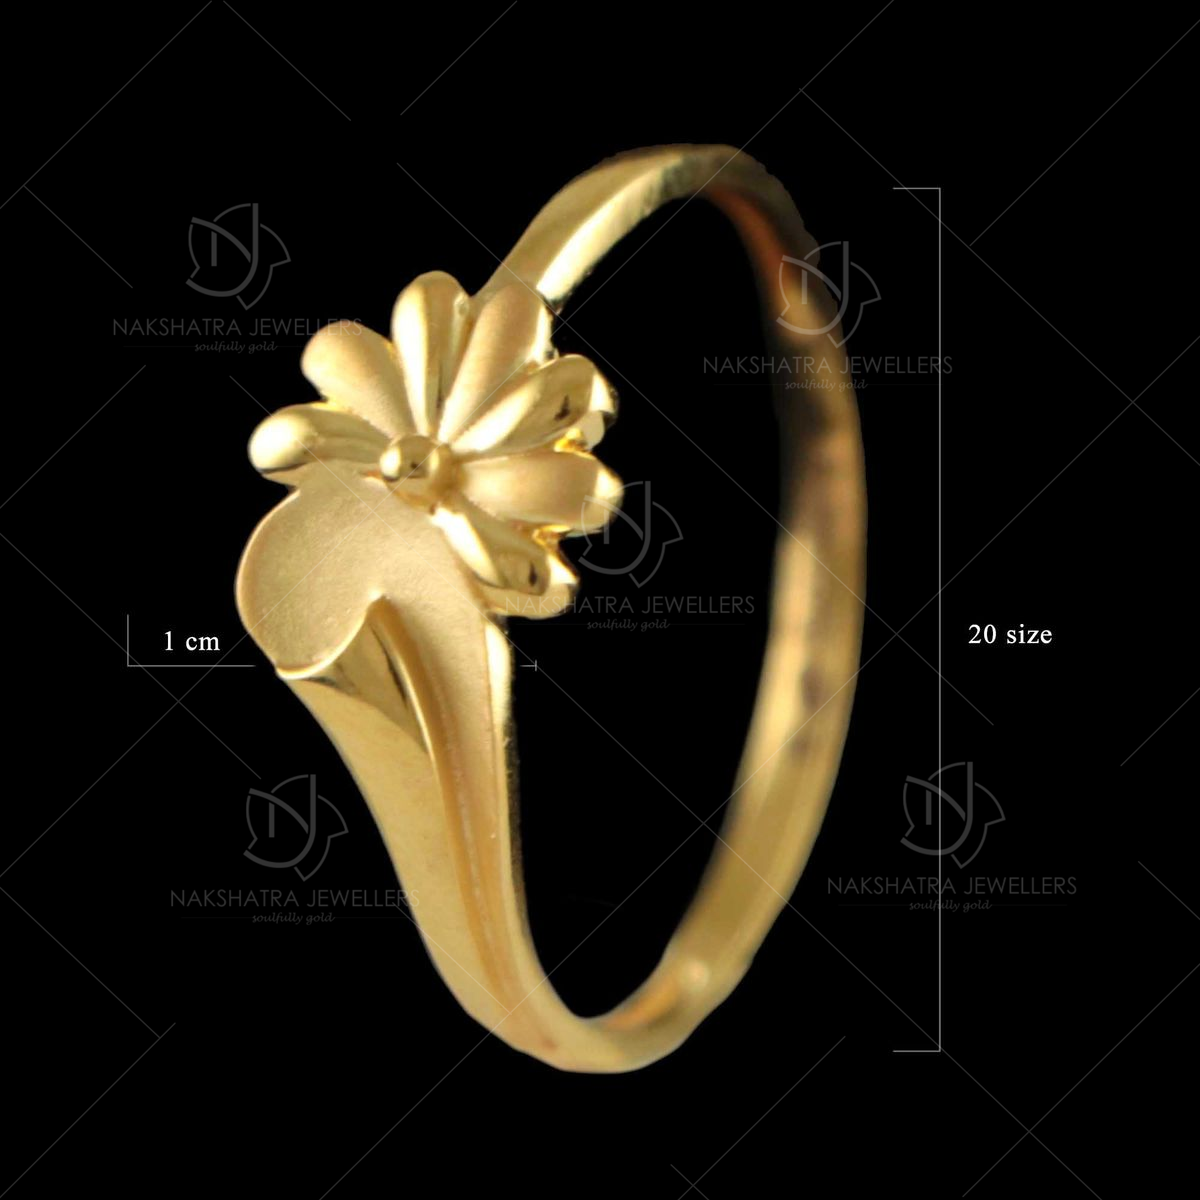 New casting gold ring design with price || Golden rings for ladies - YouTube